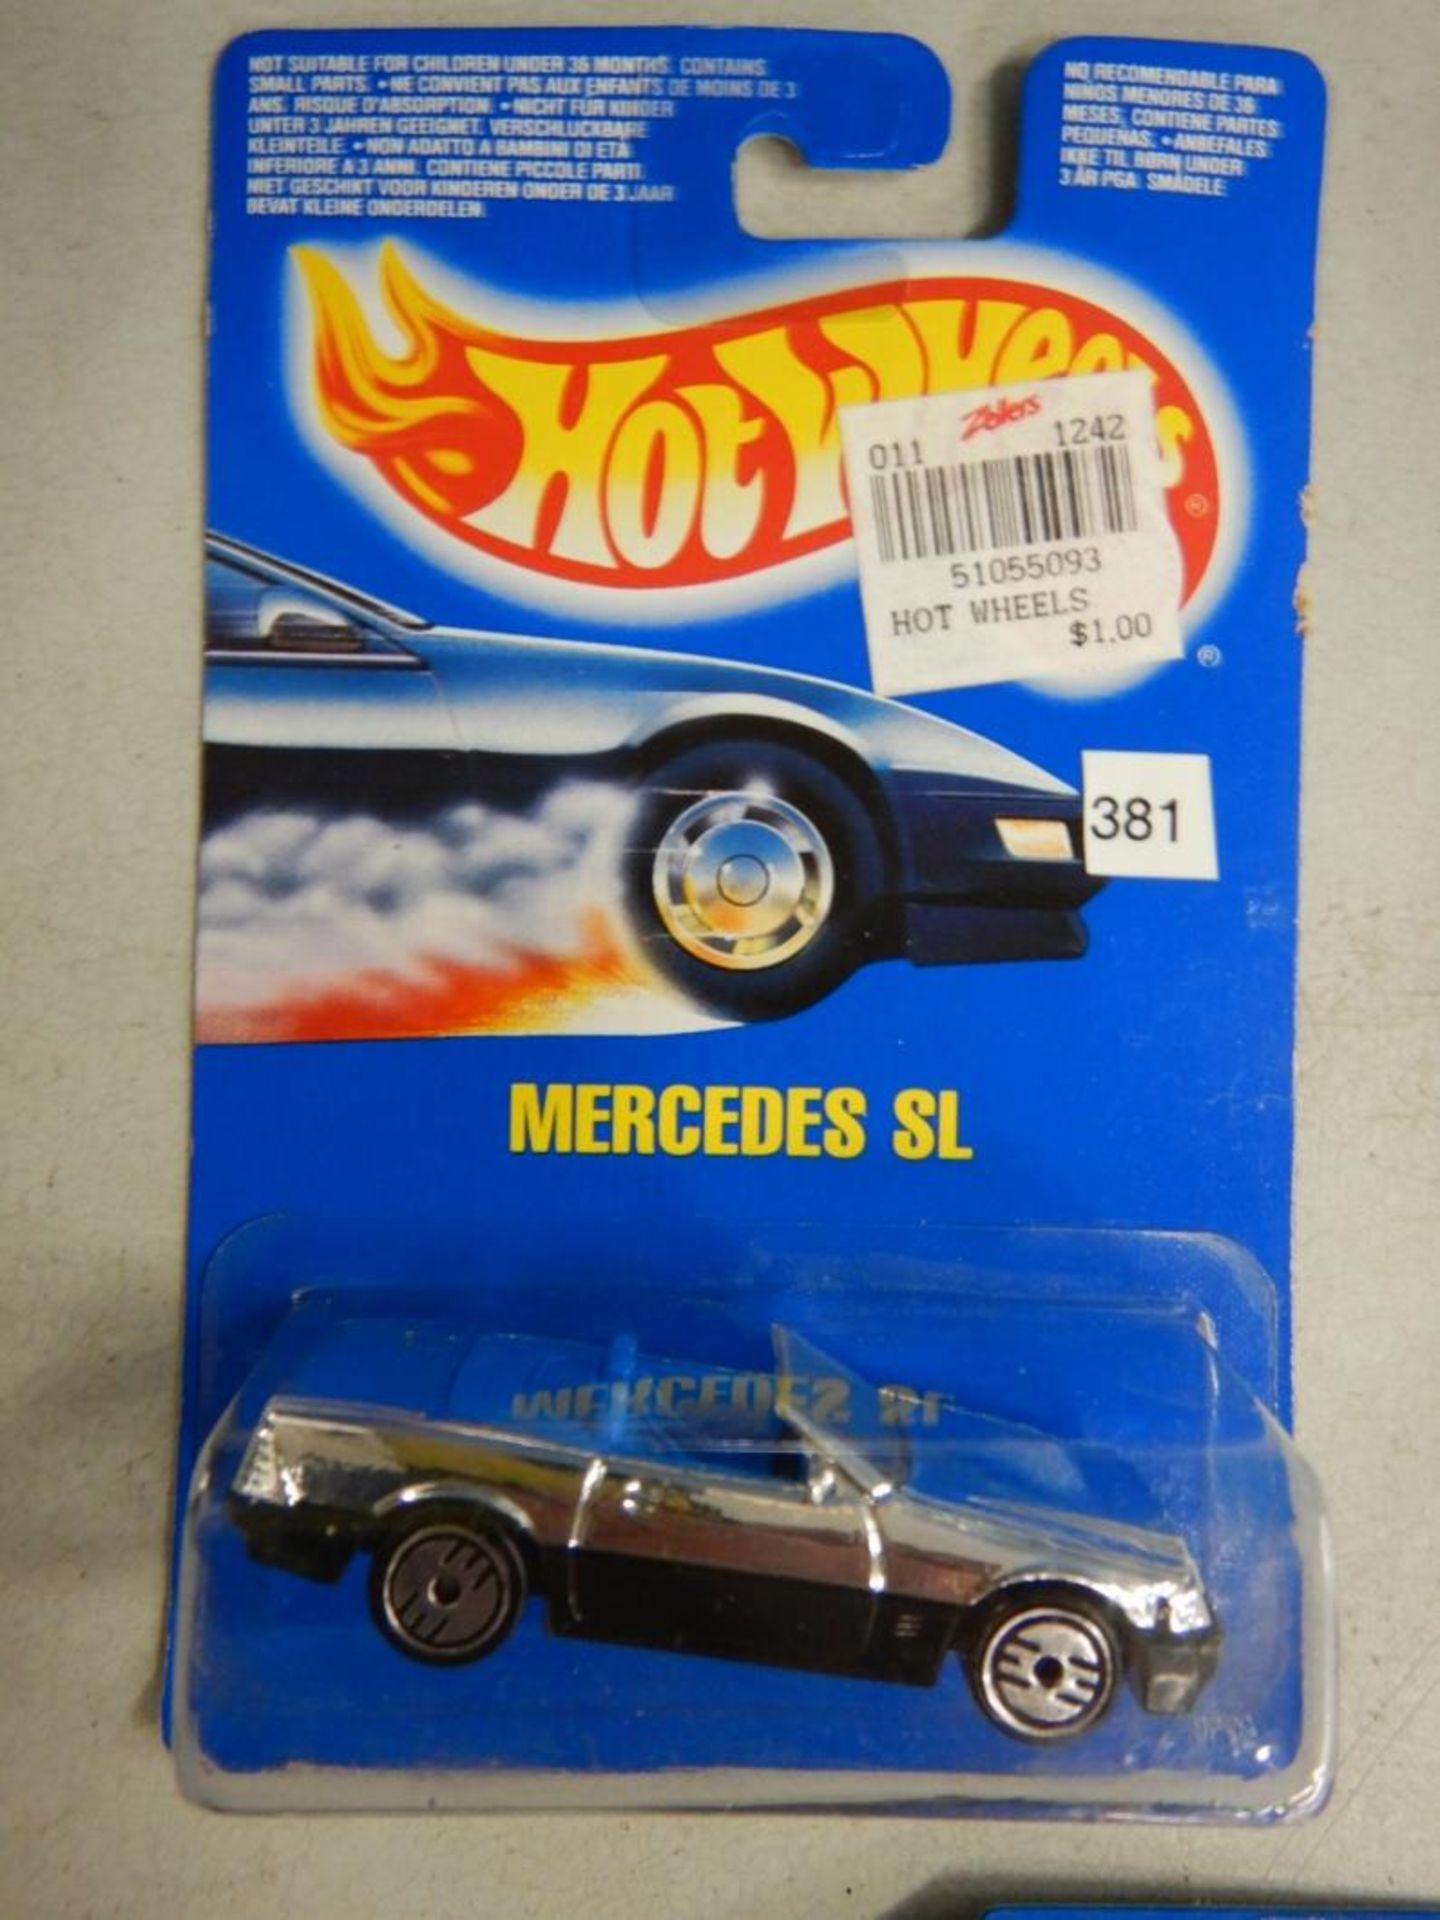 HOT WHEELS CARS - "67 CHEVELLE SS 396", "MERCEDES SL 64", "LINCOLN CONTINENTAL", "40'S WOODIE", " - Image 2 of 6